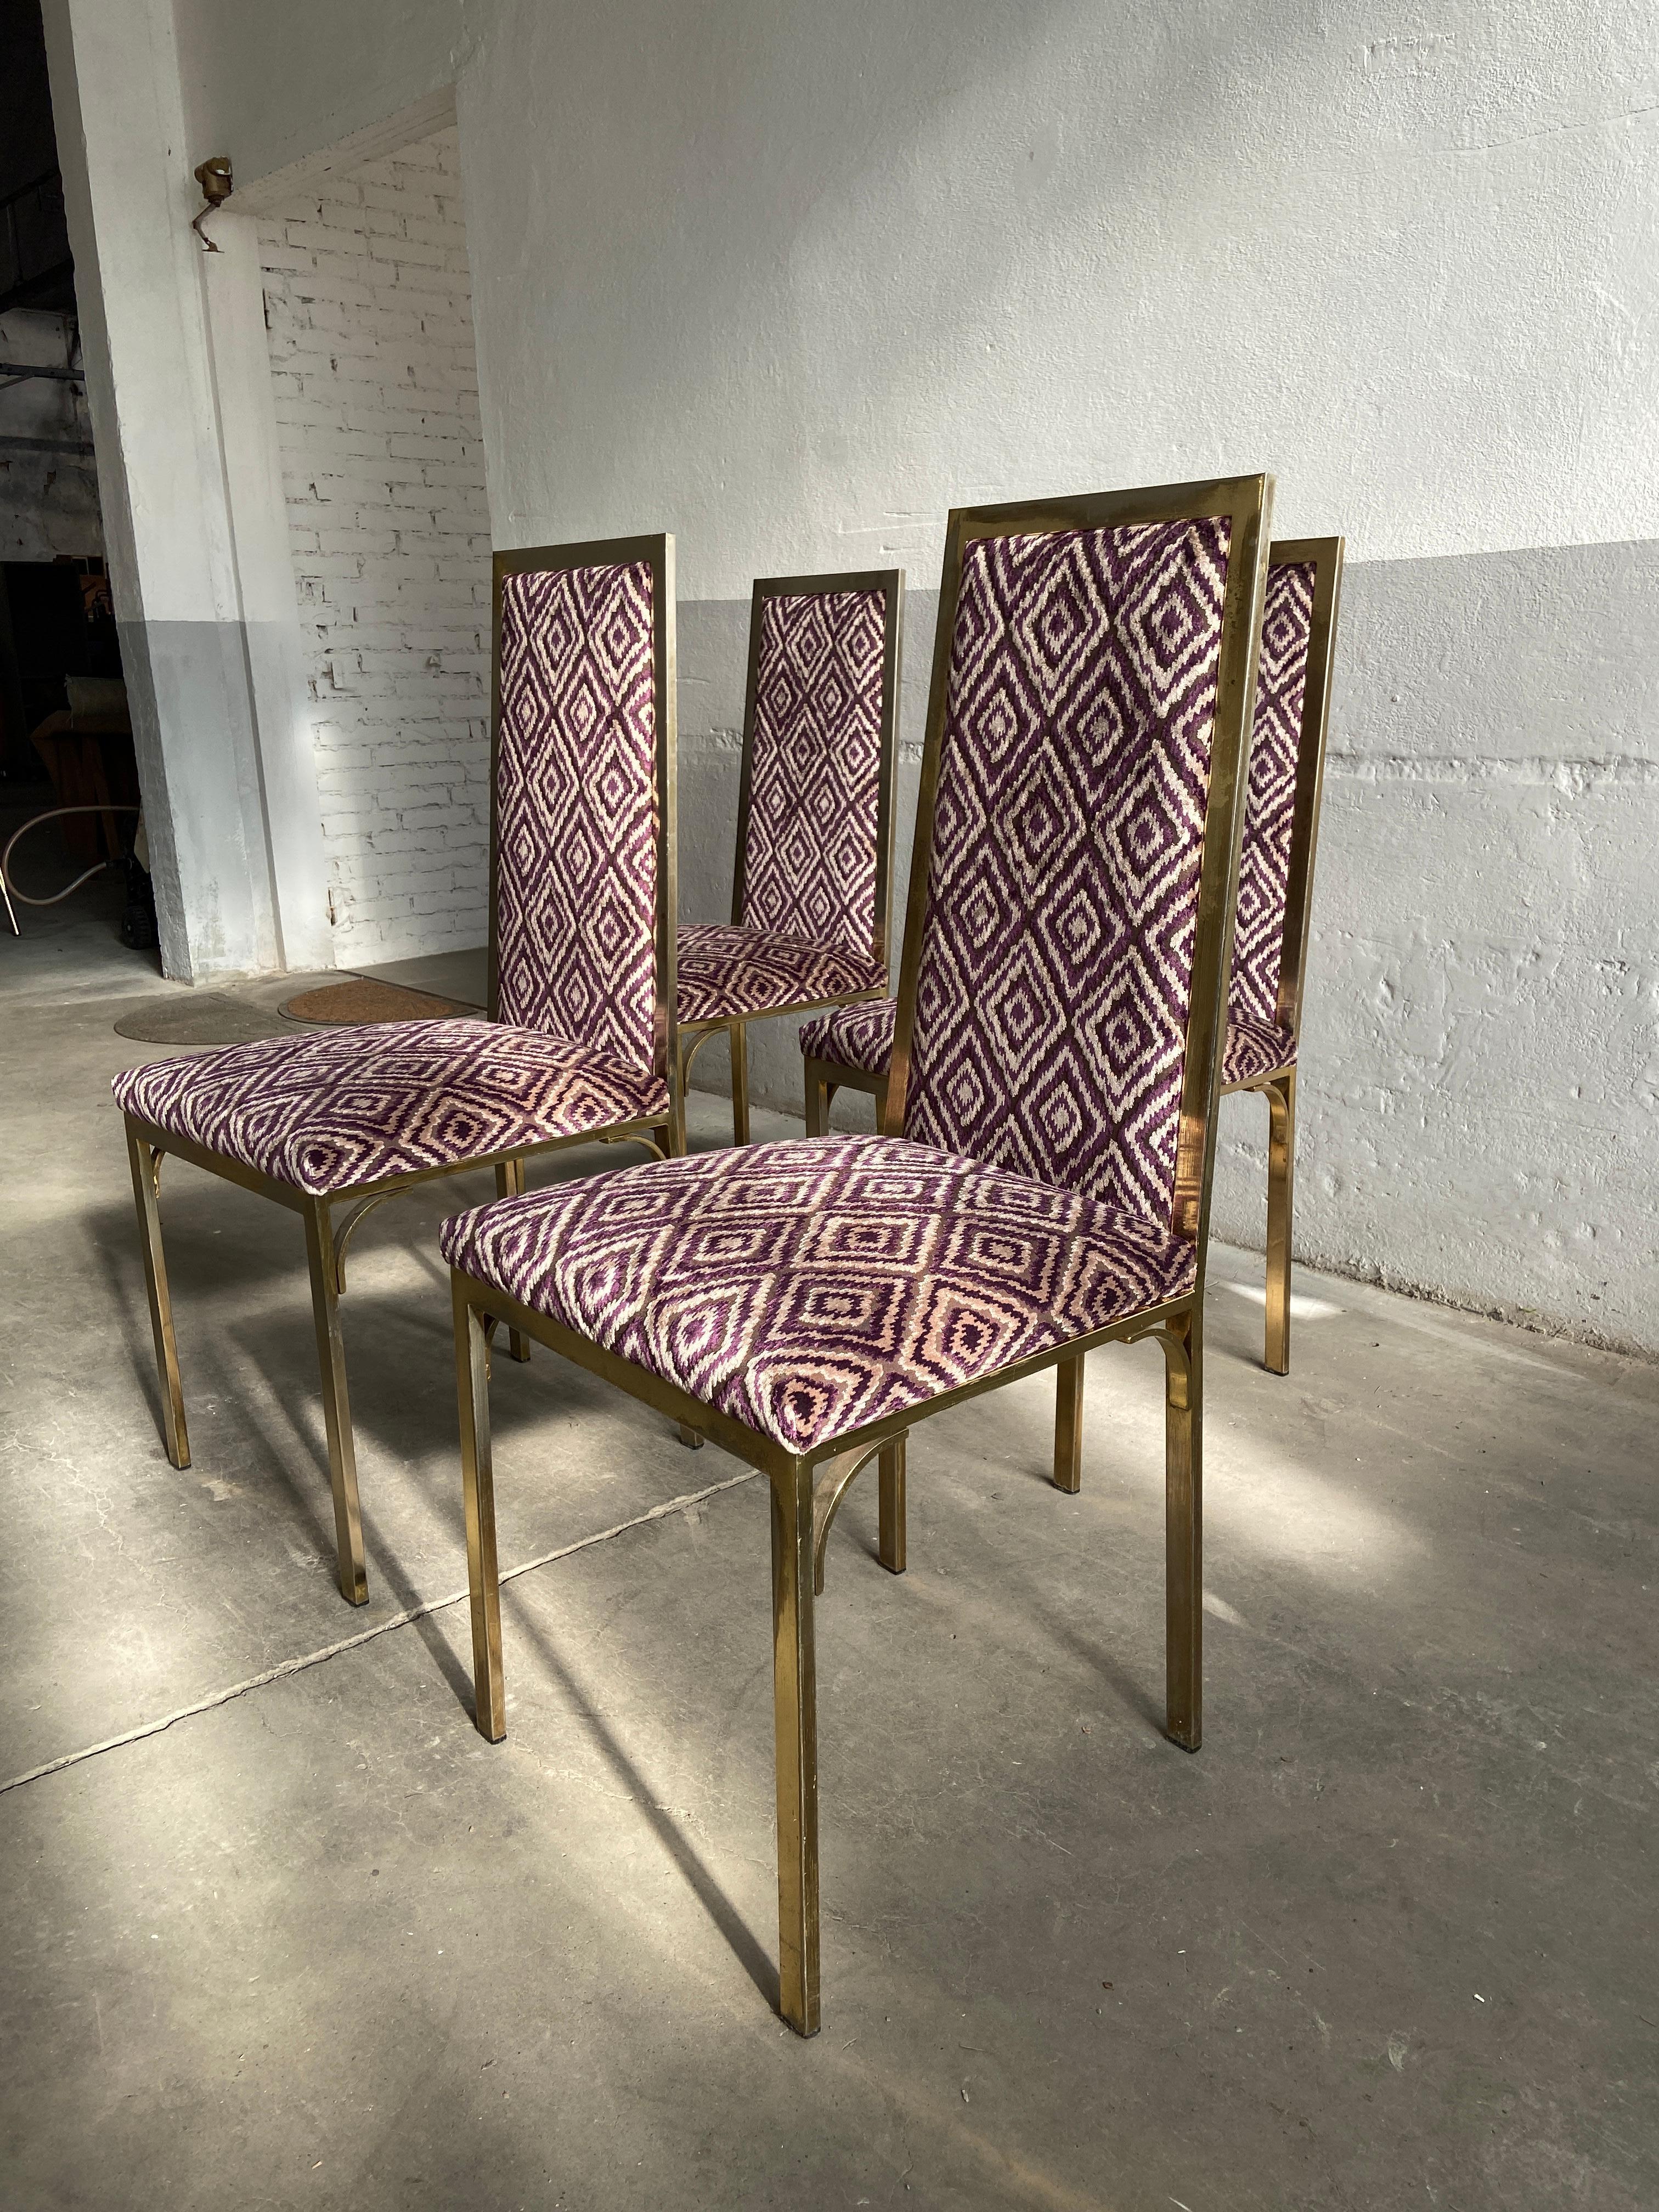 Mid-Century Modern French set of 4 Pierre Cardin gilt metal chairs reupholstered with a vintage velvet fabric from 1970s.